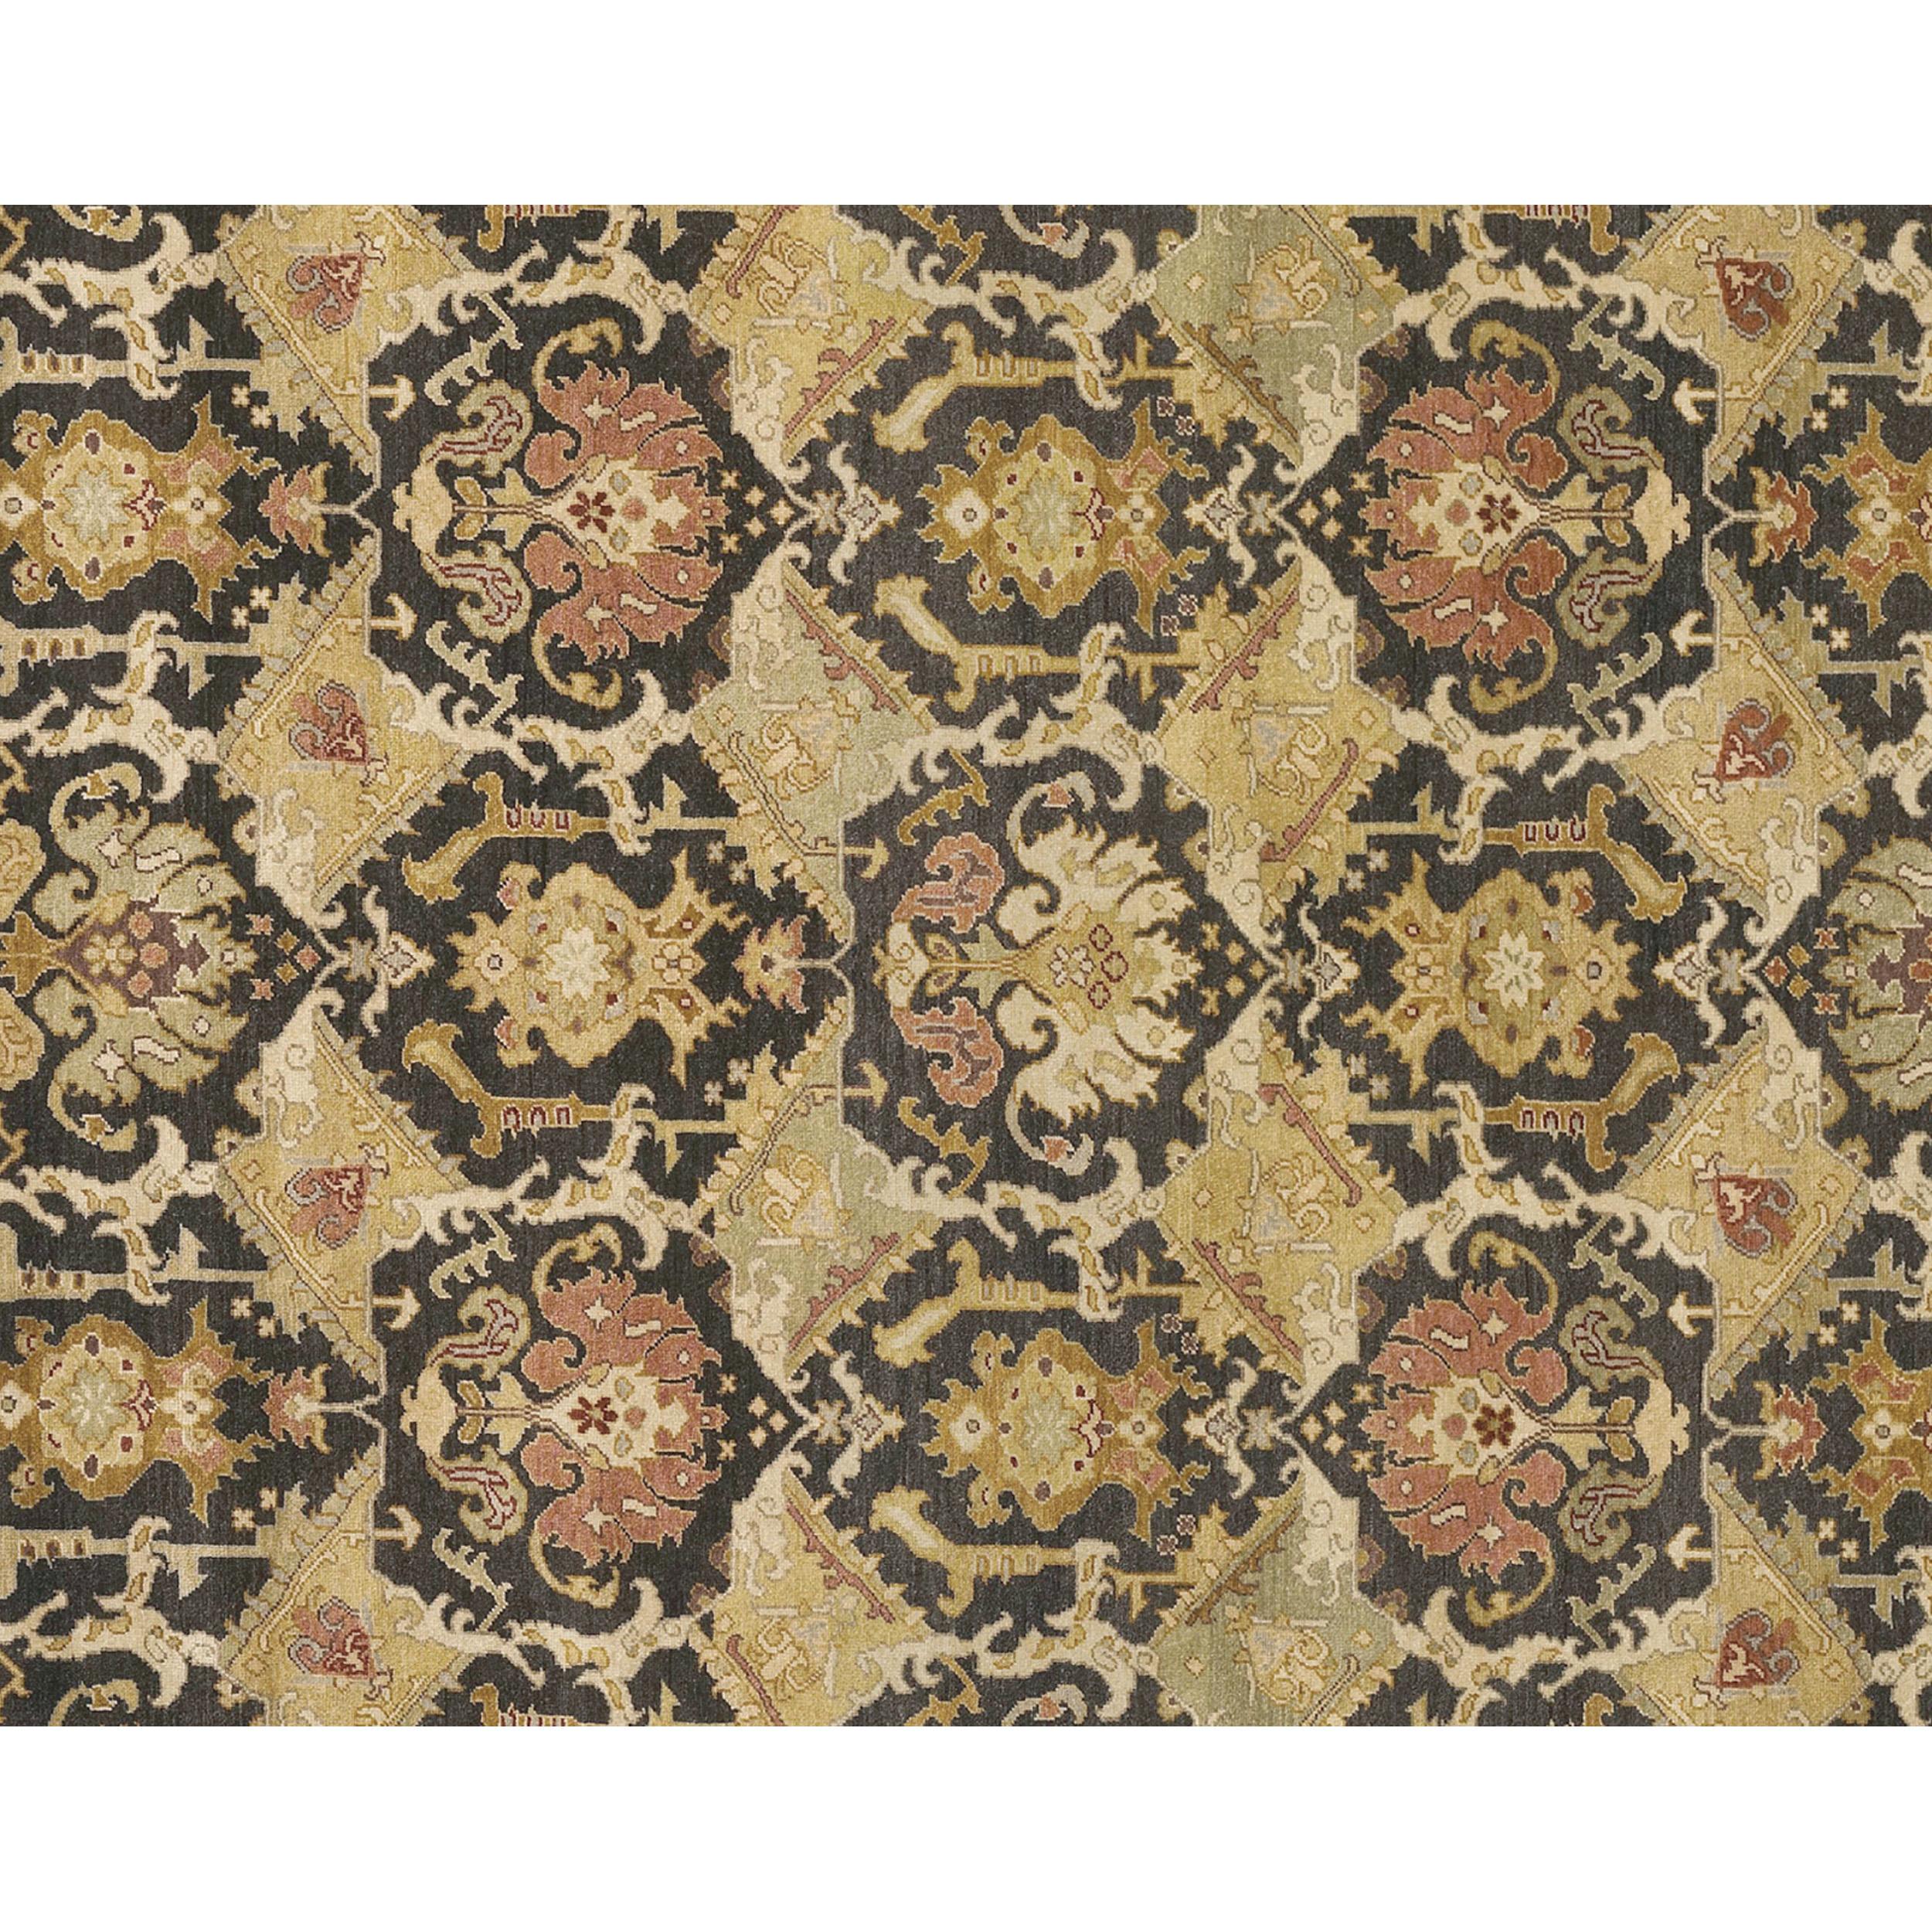 12x15 hand-knotted wool rug